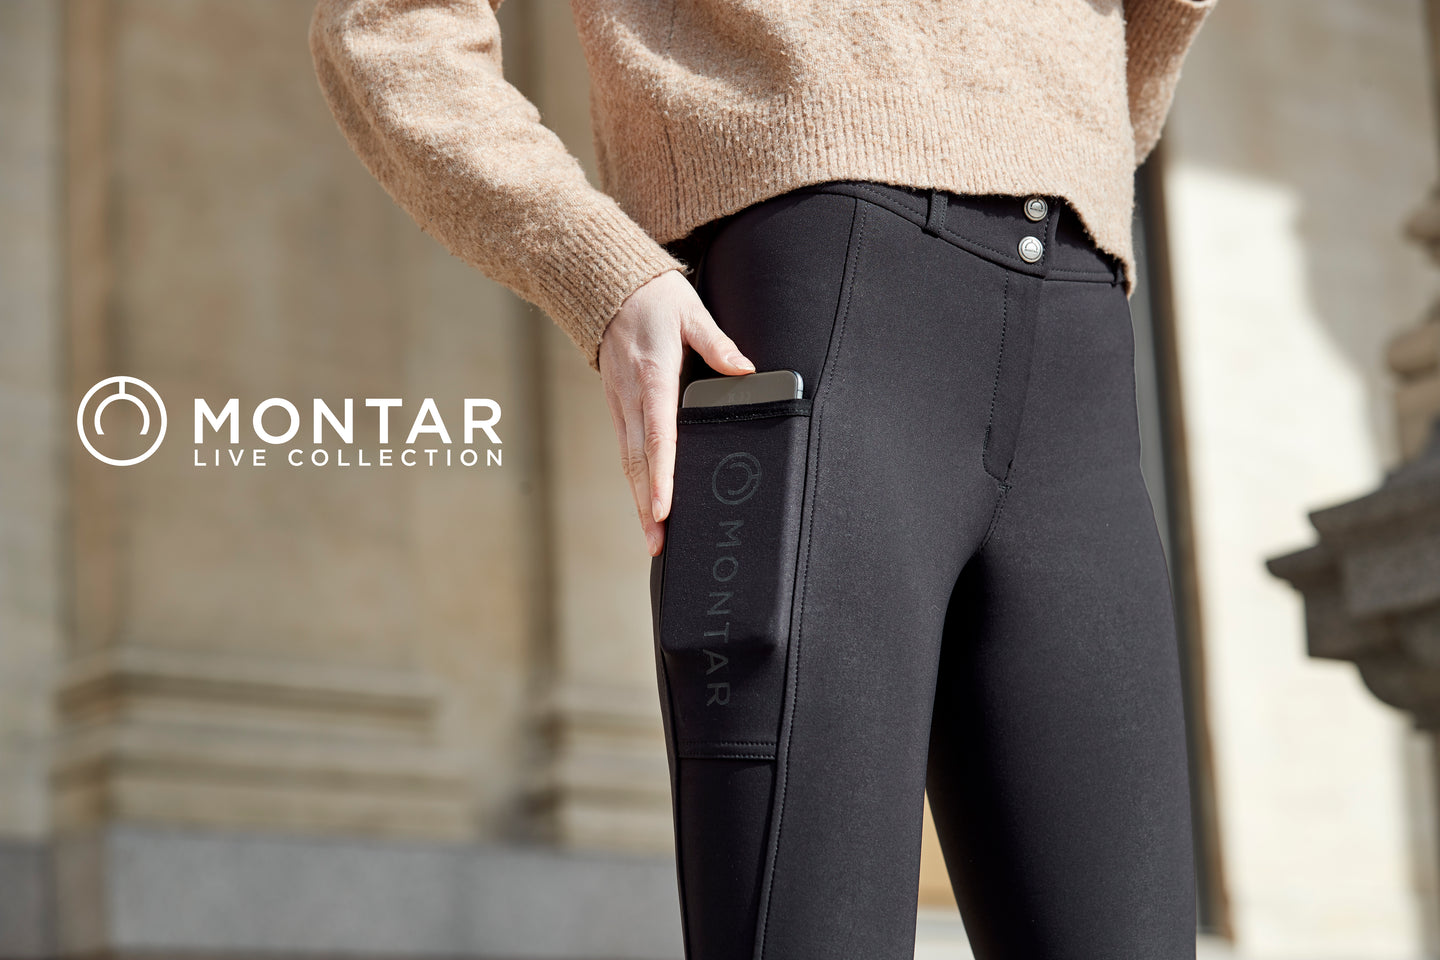 Montar Live Collection